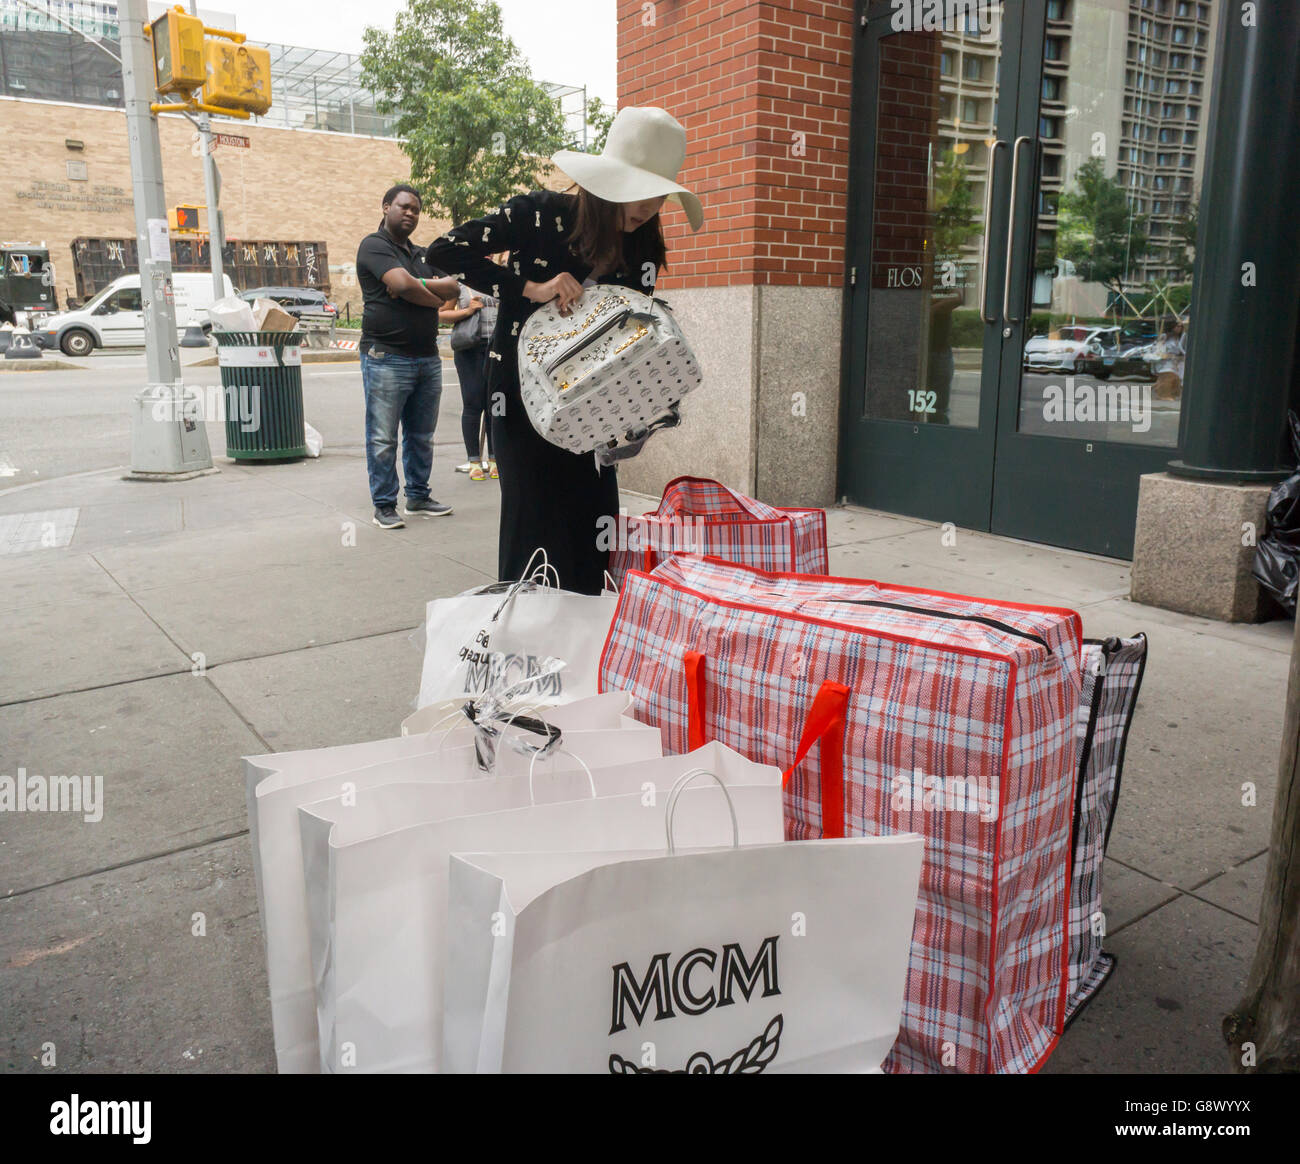 A shopper with her MCM purchases outside of their sample sale in Soho in New York on Thursday, June 23, 2016. The German company, founded in 1976 sells luxury priced leather goods and was acquired by the Korea-based Sungjoo Group in 2005 which revitalized the brand. (© Richard B. Levine) Stock Photo